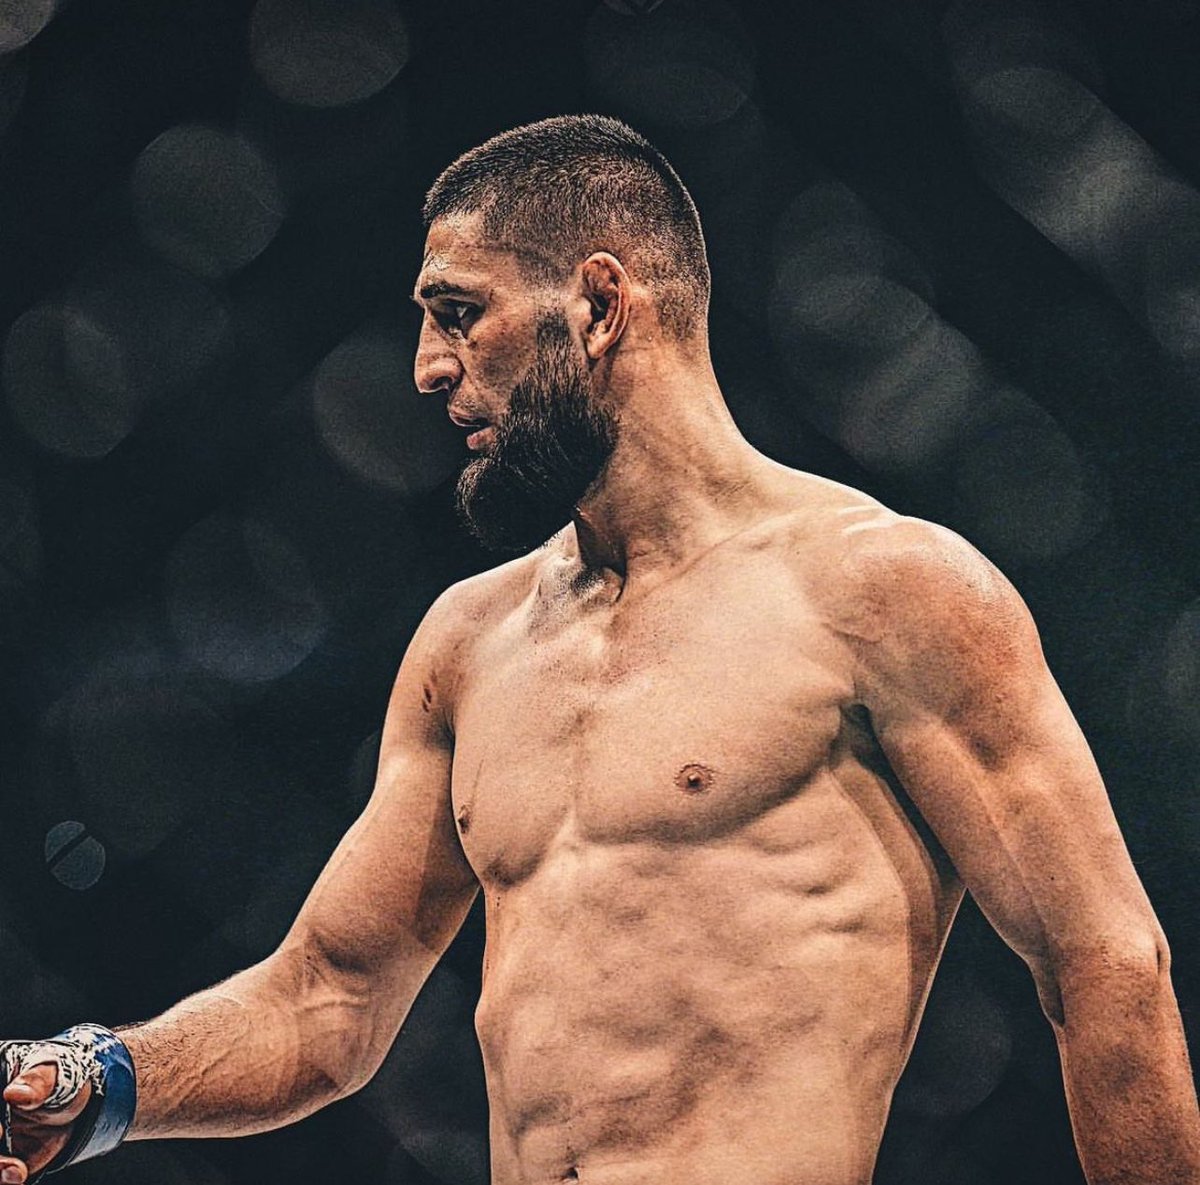 Grapplers Khamzat beat in just 13 pro fights:

✅ Aliskerov = Most accomplished Sambo fighter in UFC History

✅ GM3 = Most submission wins in UFC MW history

✅ Burns = Most accomplished BJJ fighter in UFC WW history

✅ Usman = Highest takedown defence % in UFC history